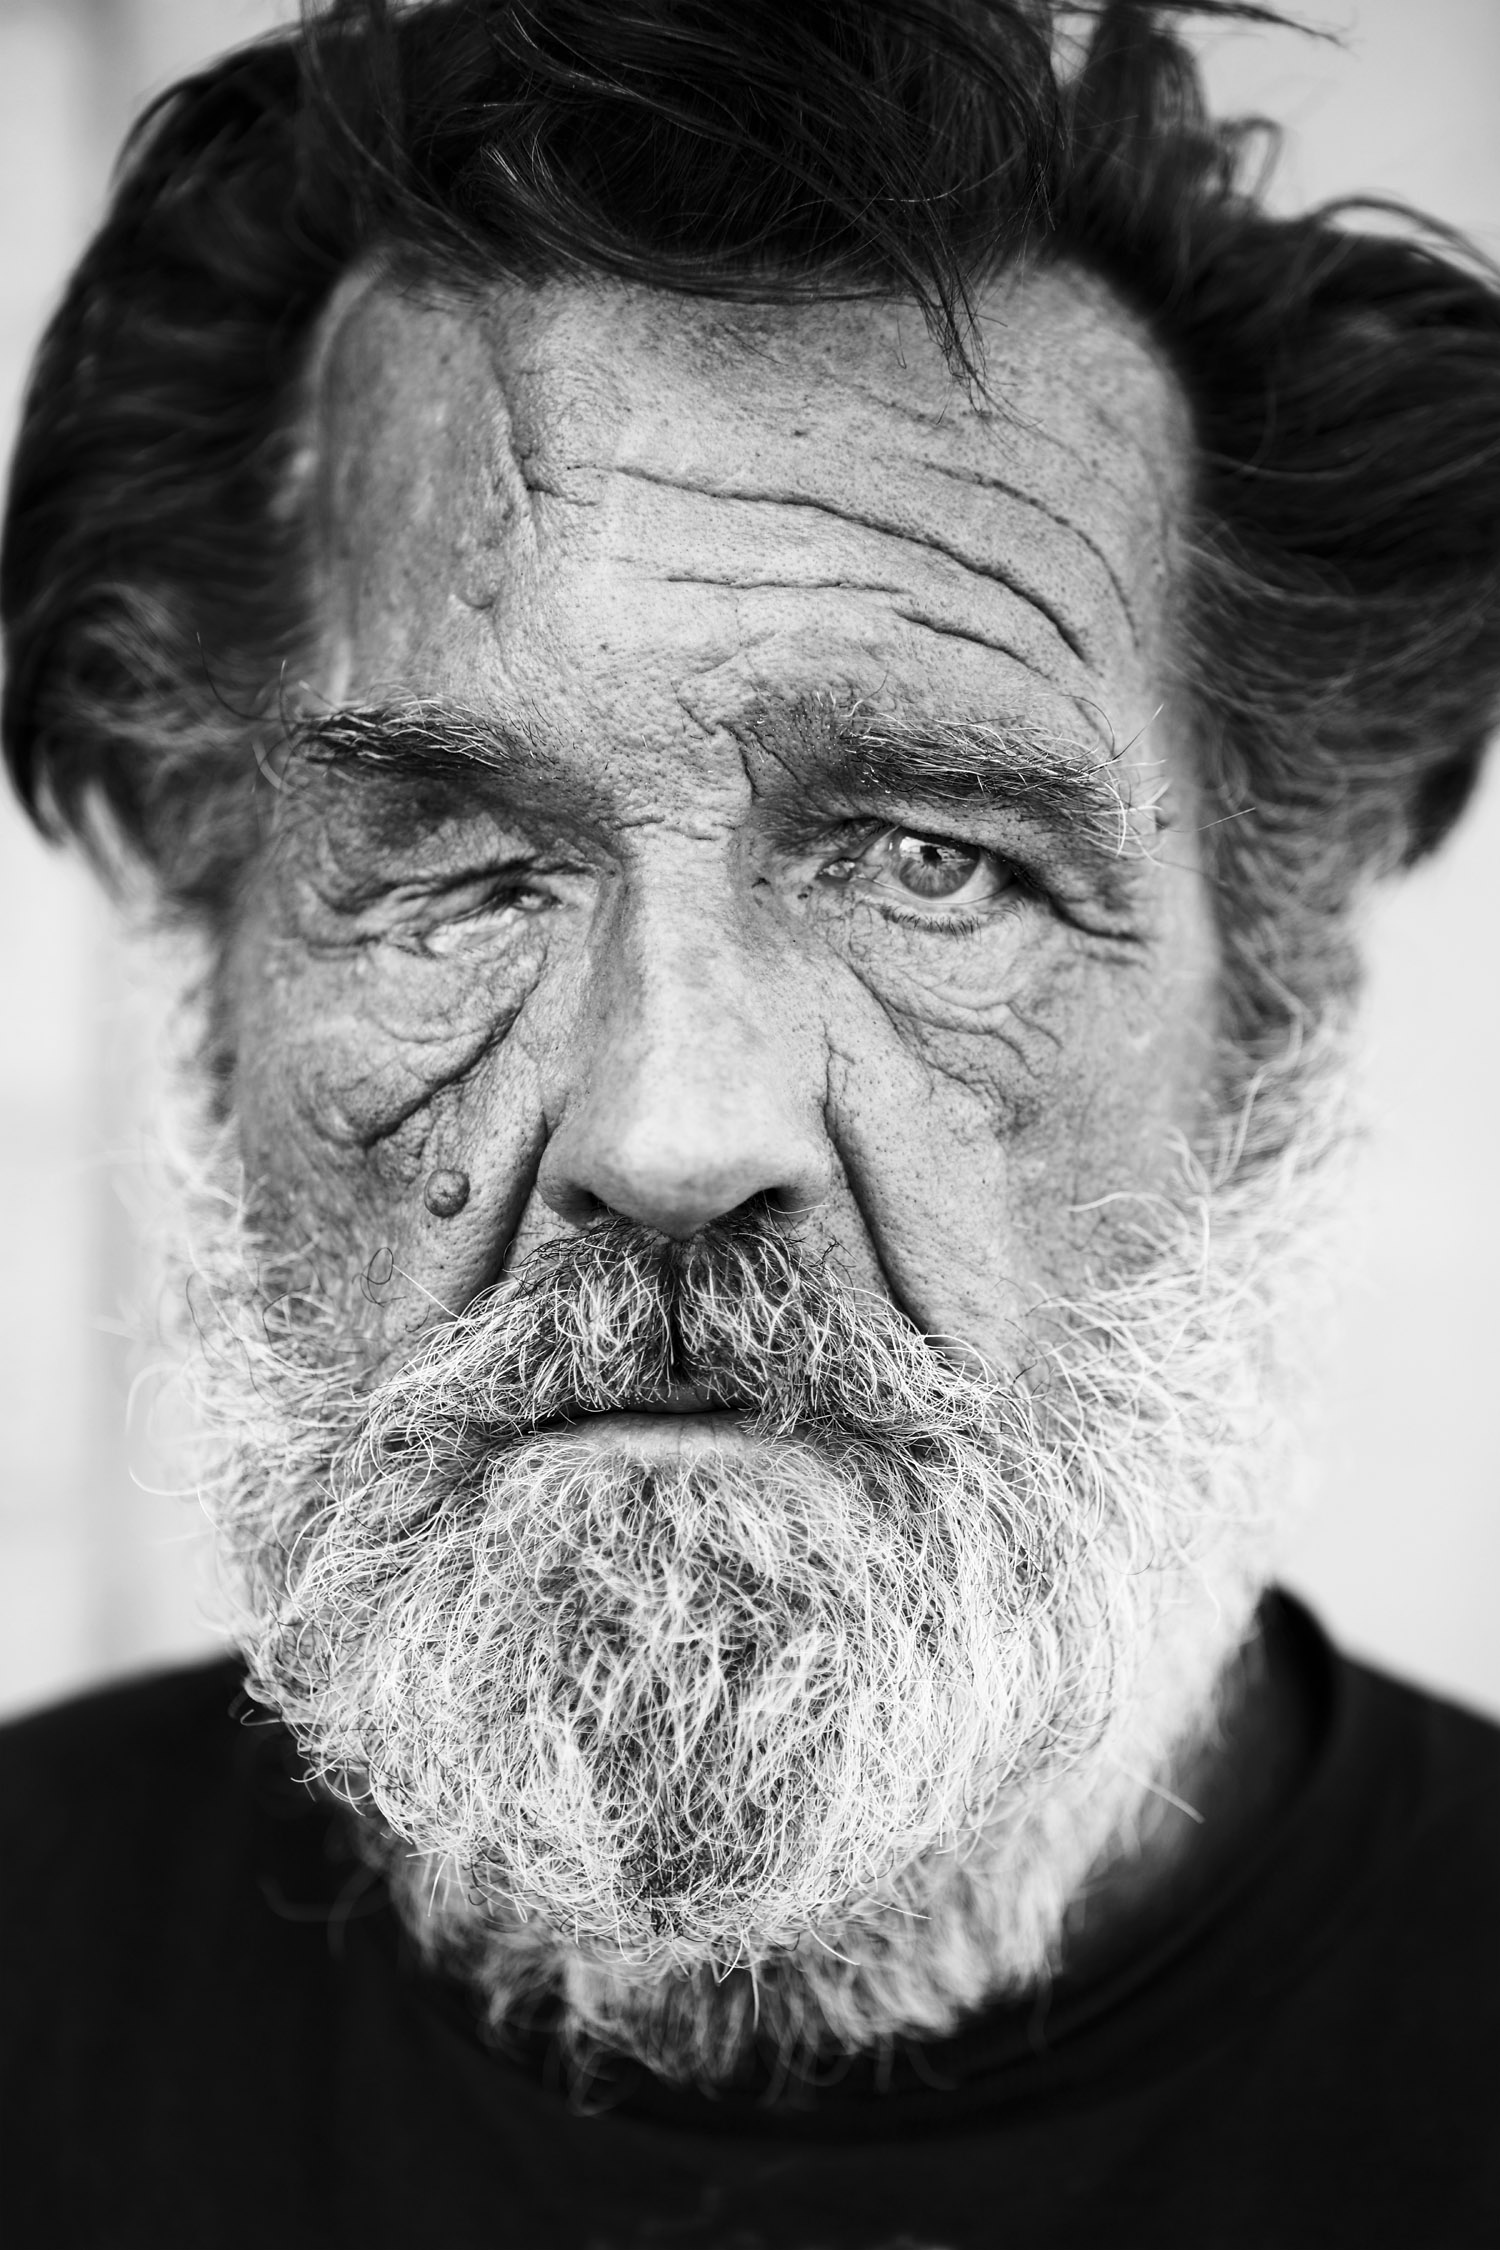 Homeless Portraits | 10dollarproject | Page 2